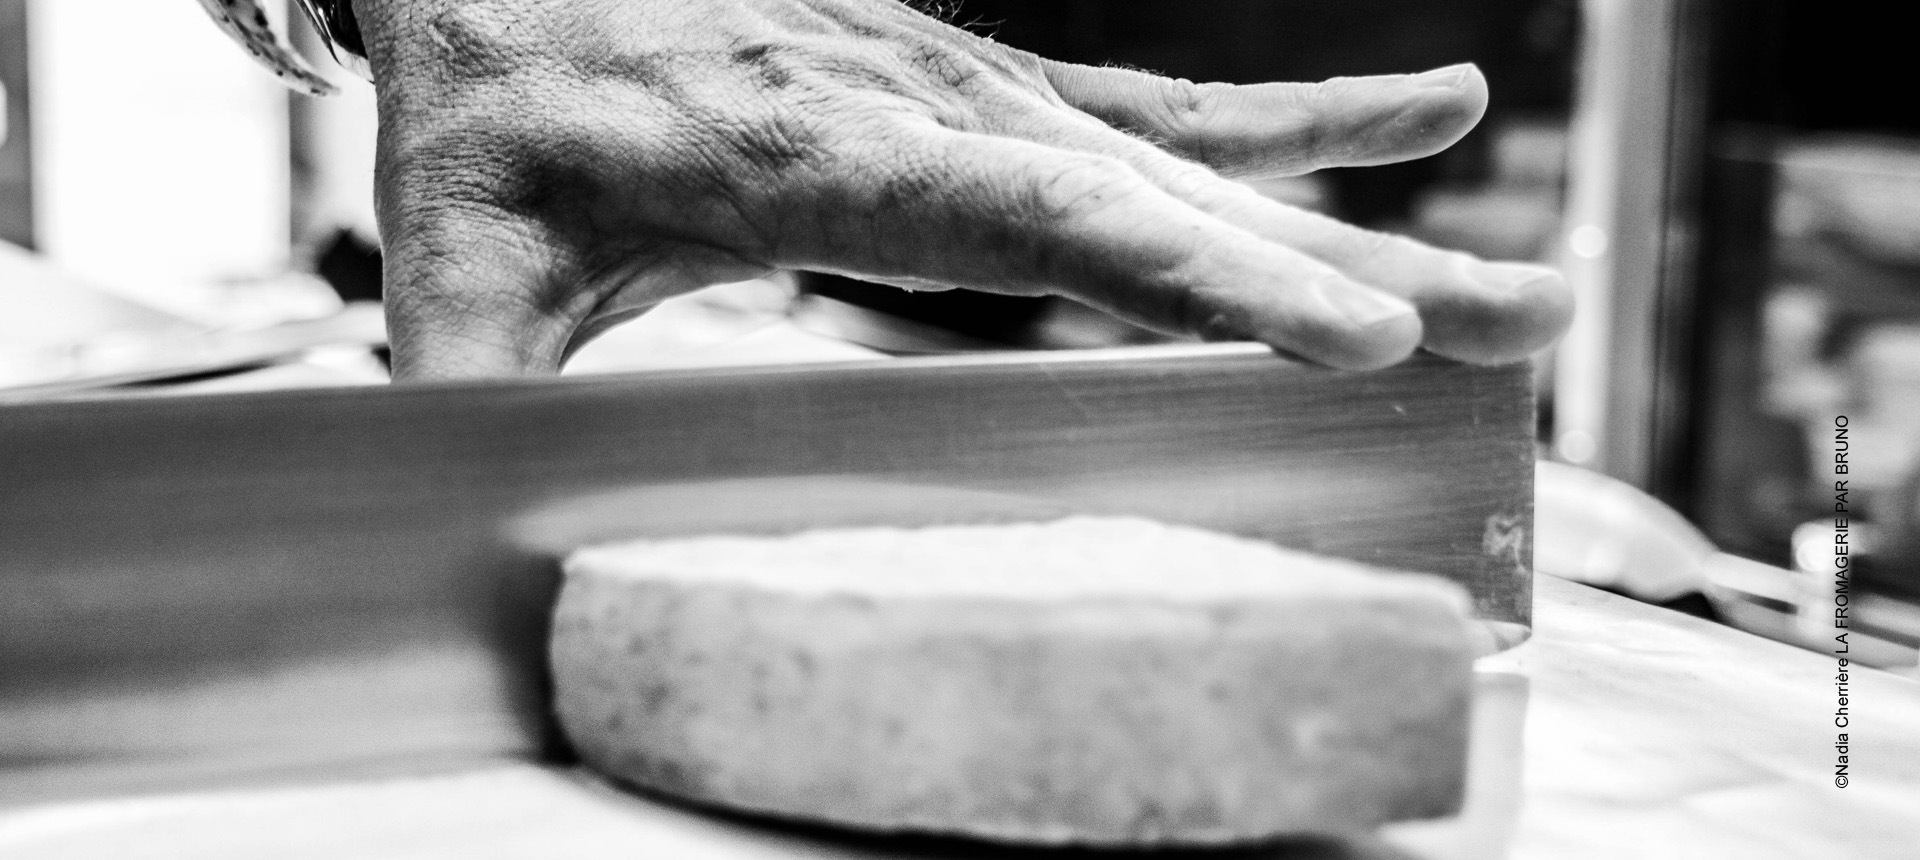 fromagerie bruno brive